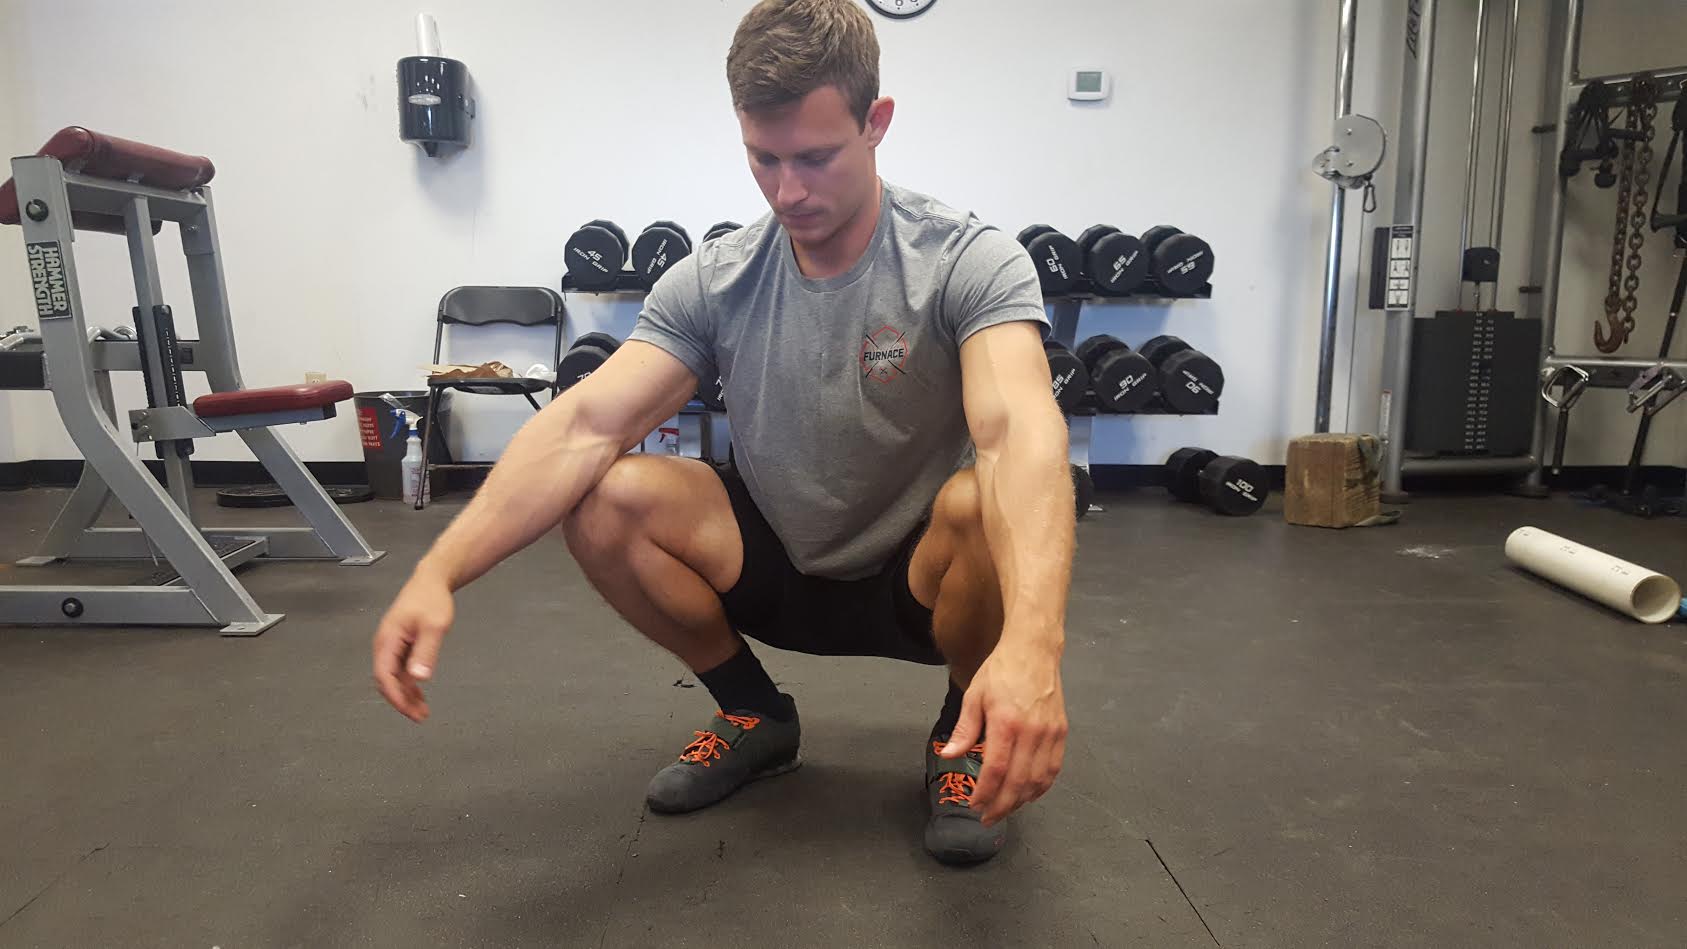 How & When to Use Heel Elevated Squats Based on New Studies